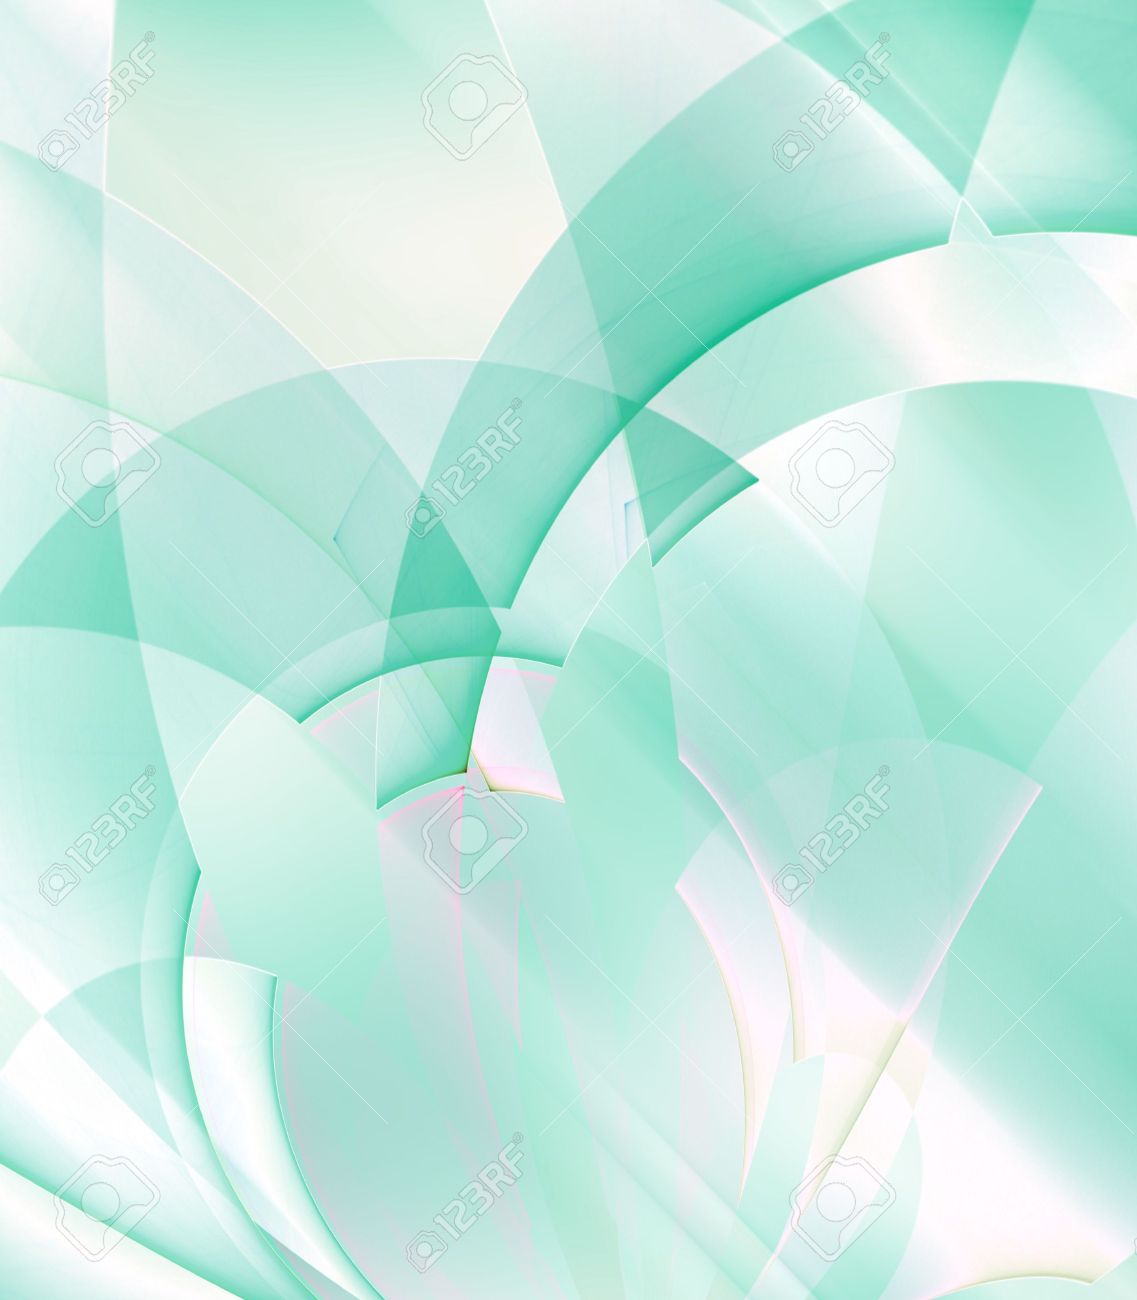 Layered Curves And Arch Patterns In Mint Green Color   Fractal 1137x1300